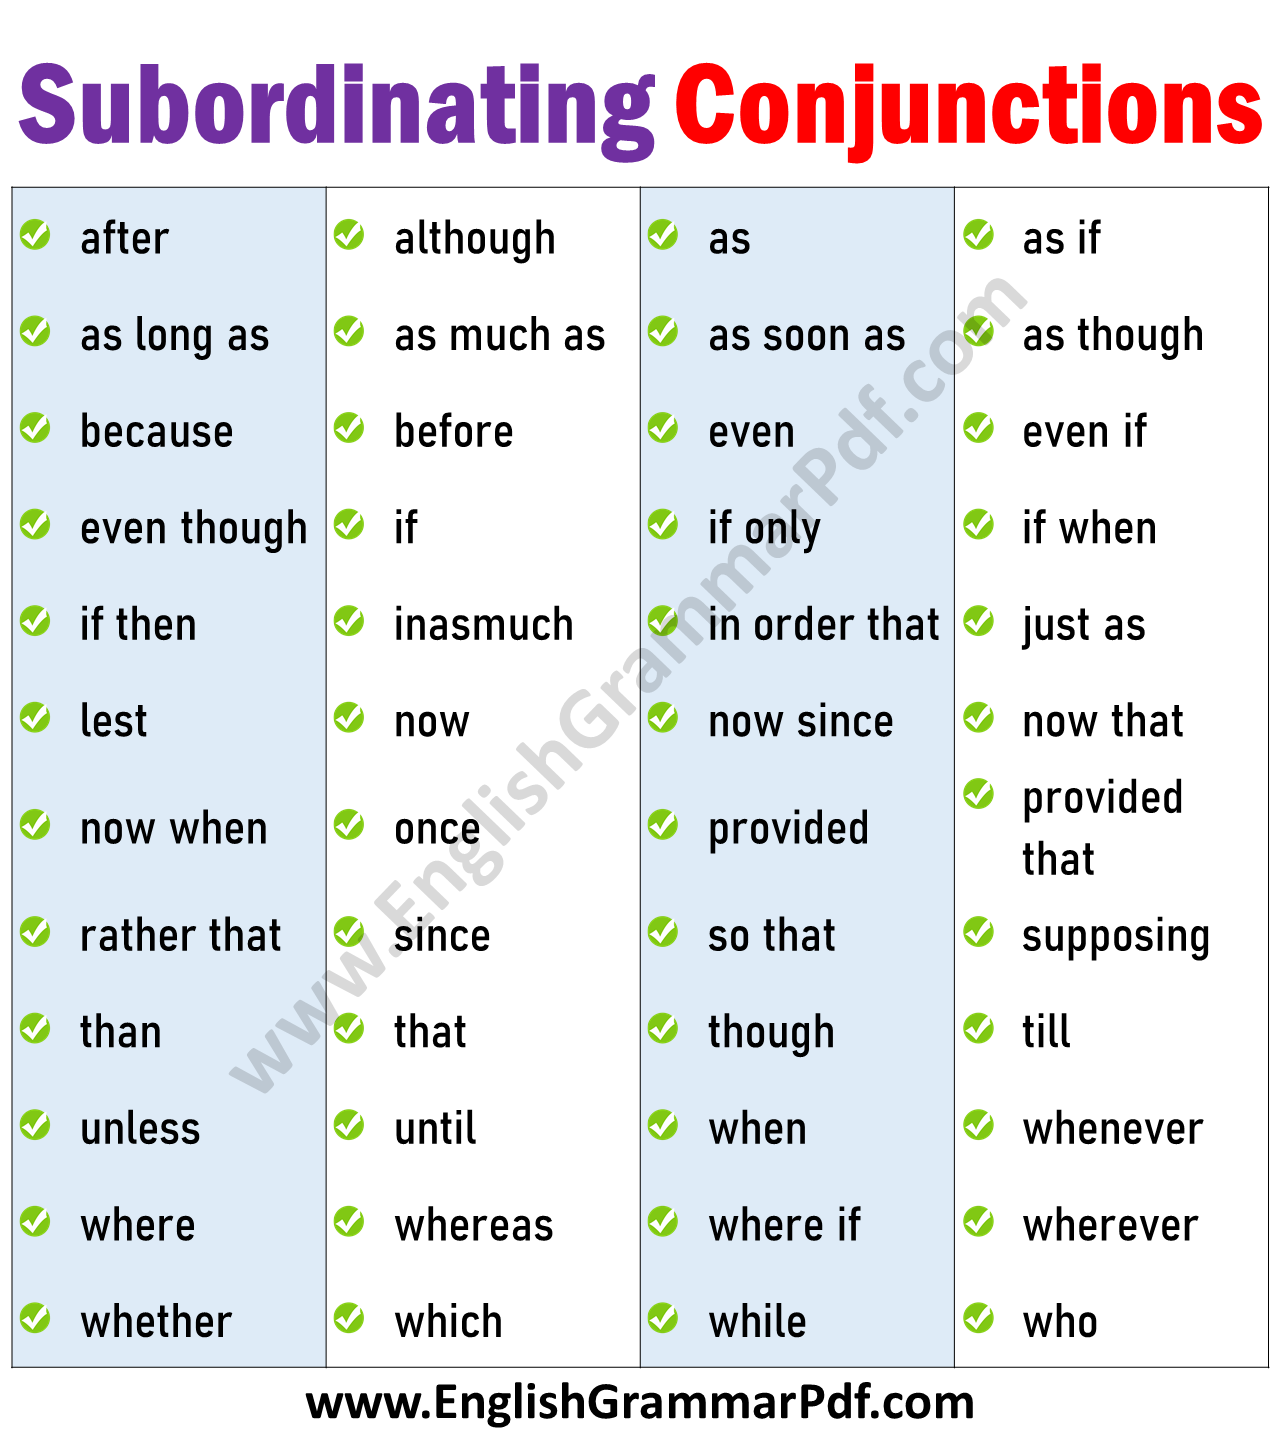 list of Subordinating Conjunctions